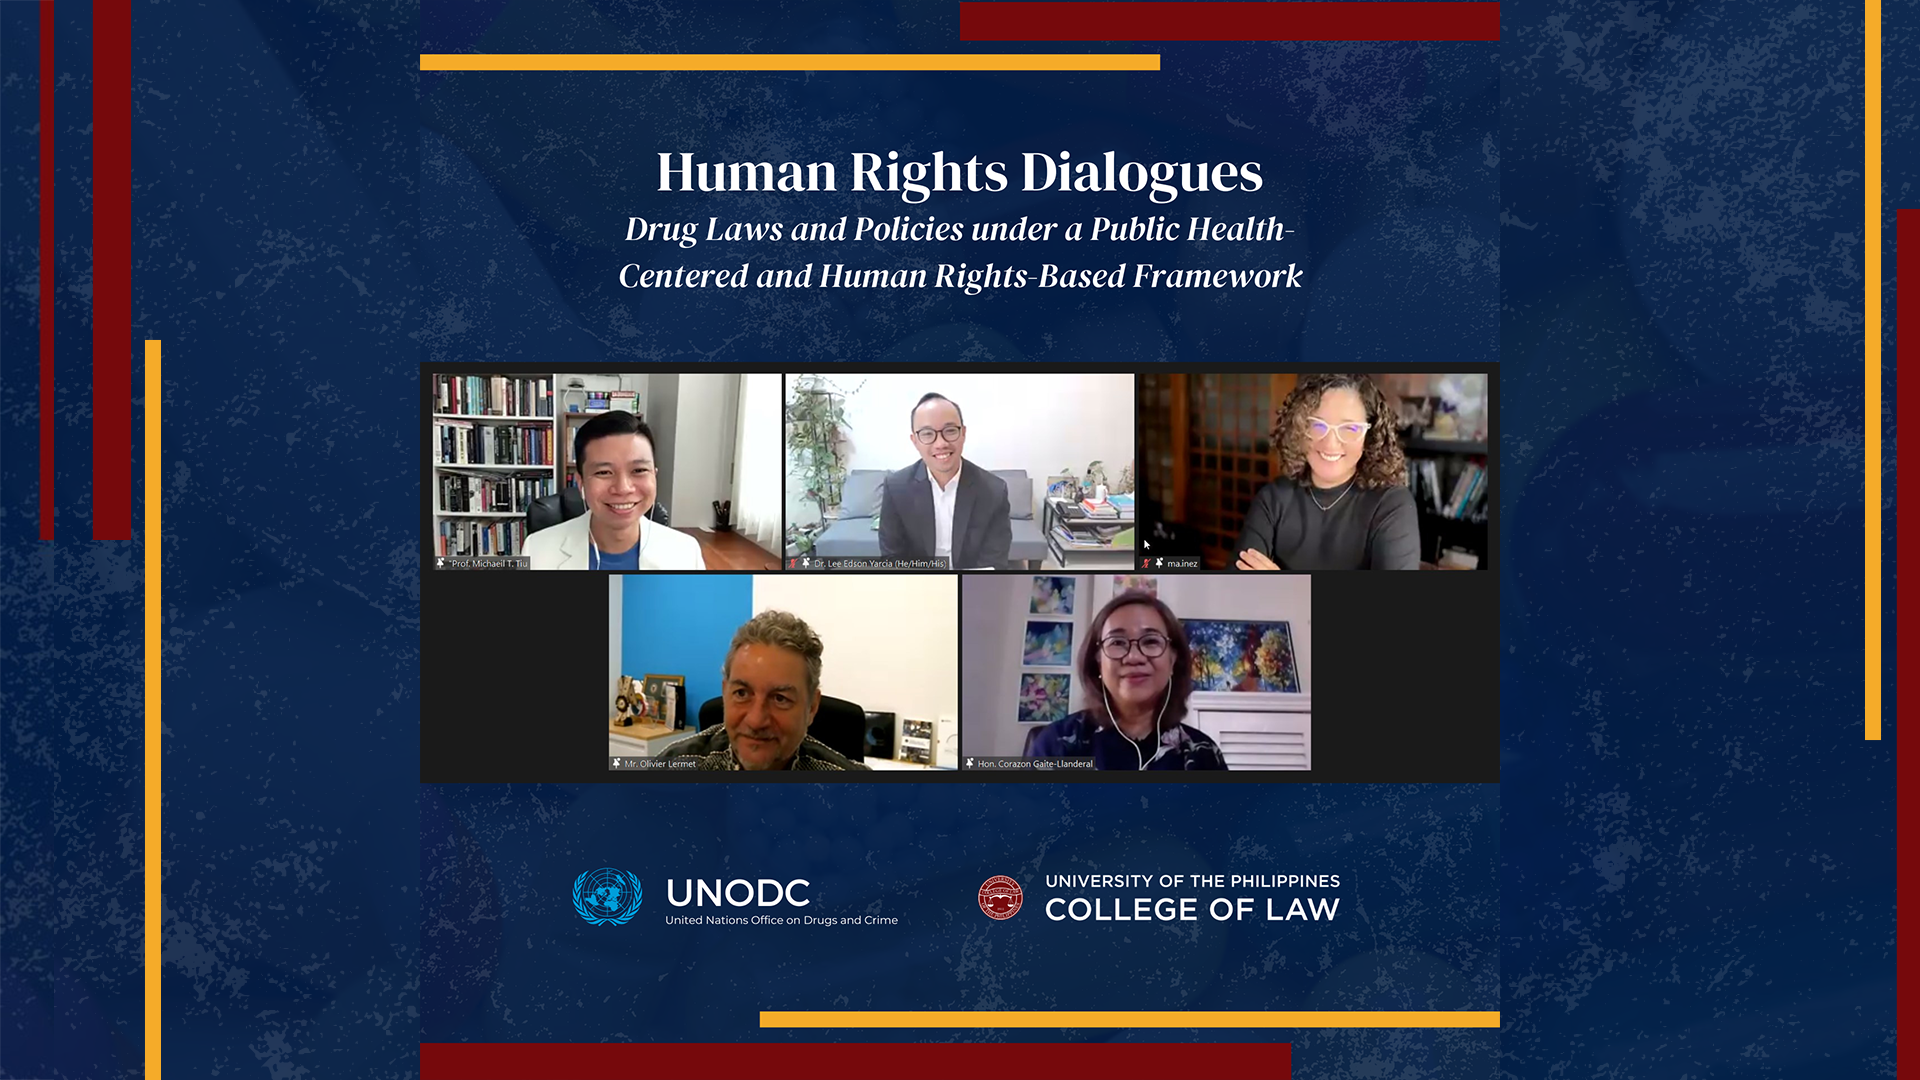 UP Law and UNODC host Human Rights Dialogues on Drug Law Reform